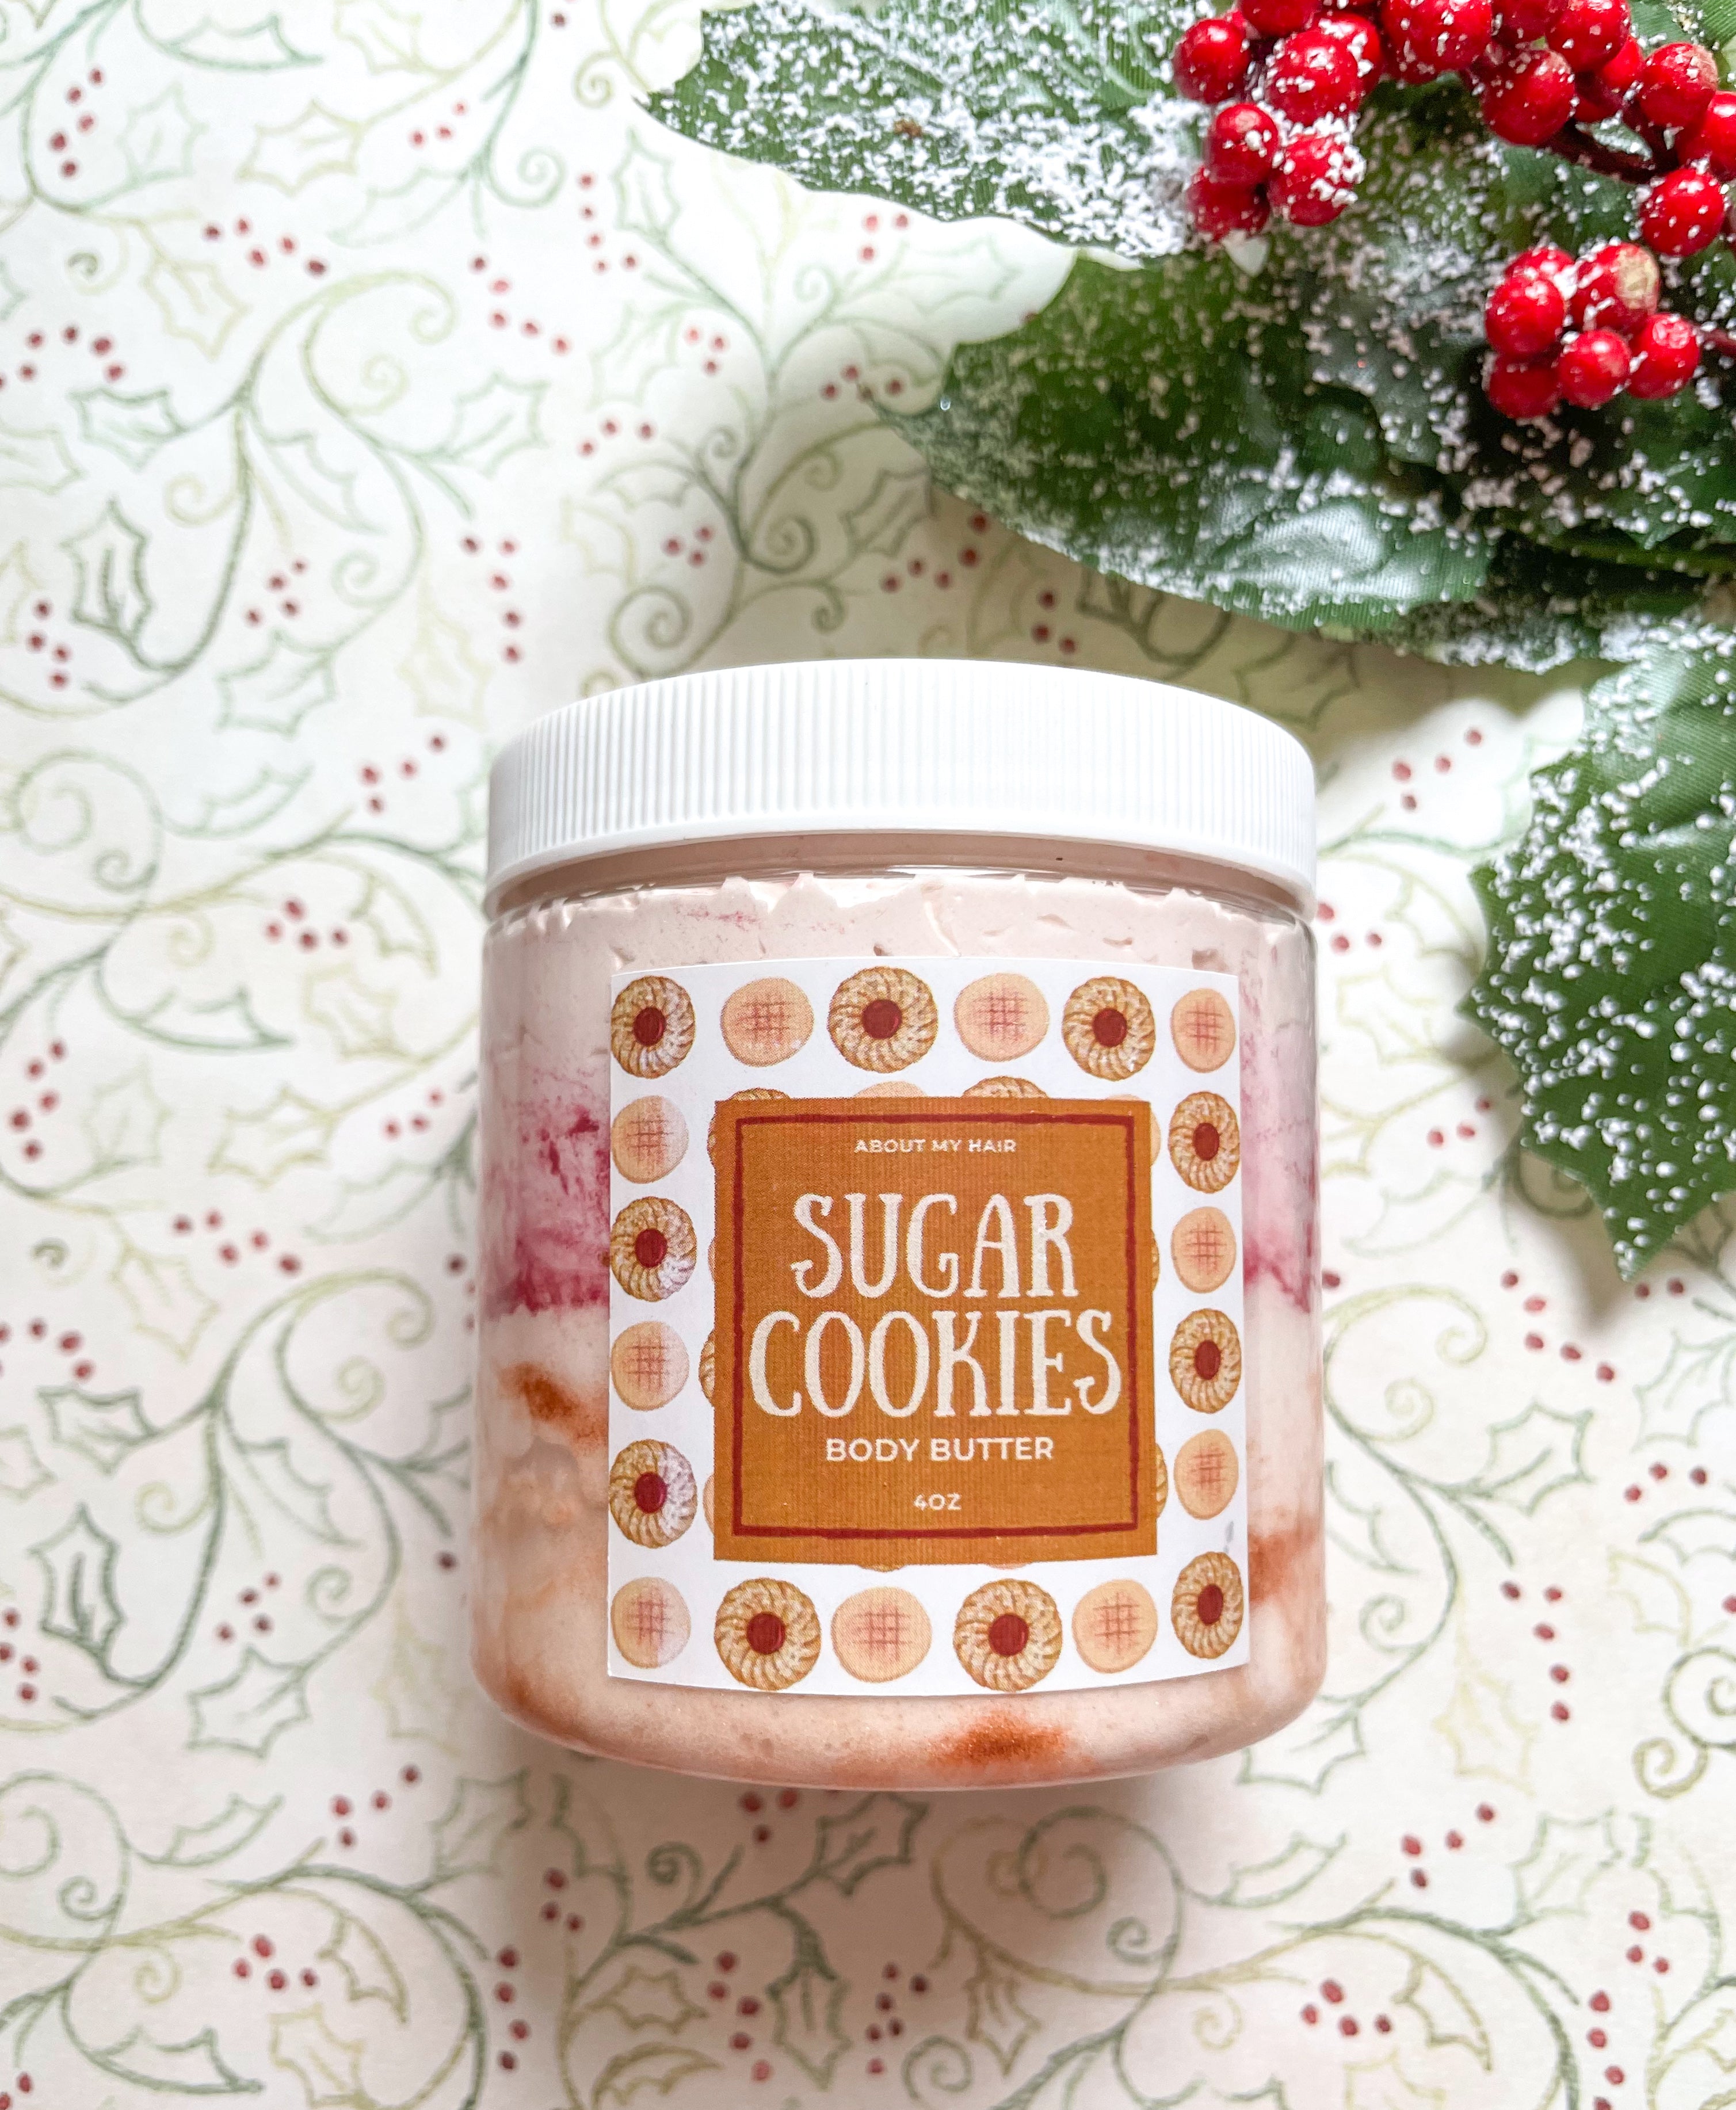 Sugar Cookies Body Butter | About My Hair Care